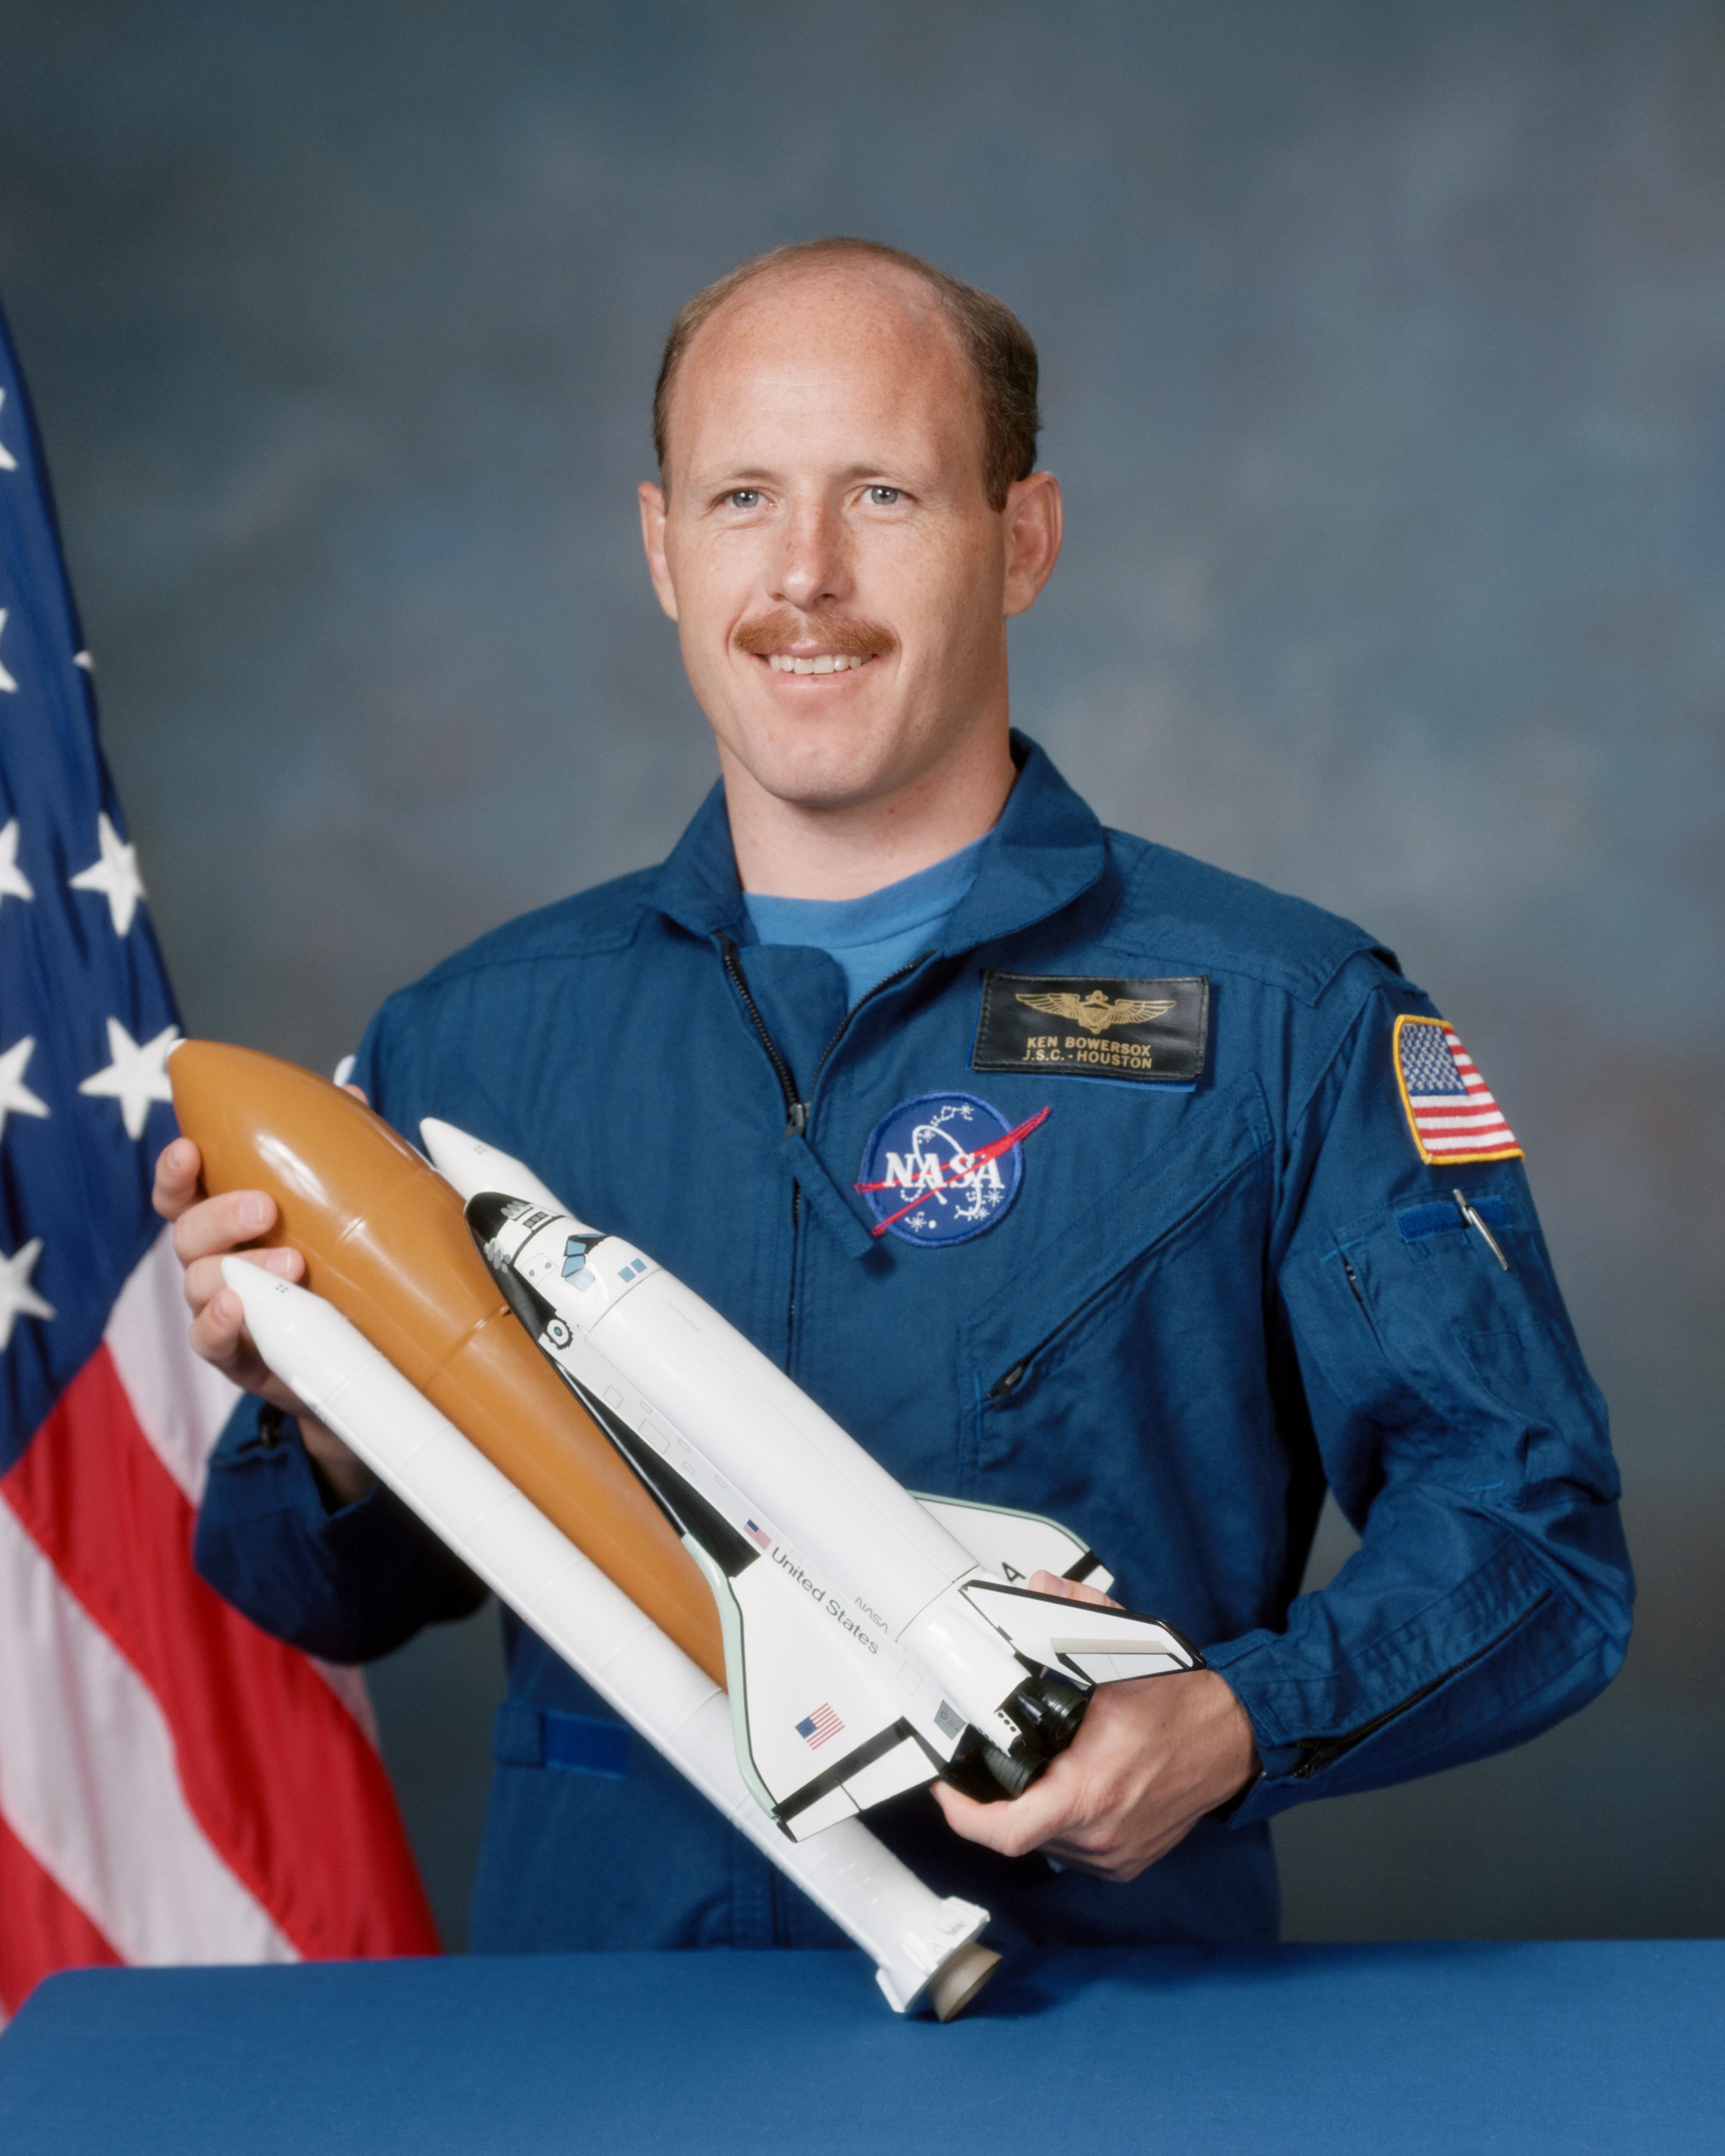 Astronaut Kenneth Bowersox, in his official portrait, holding a model of the space shuttle Discovery.